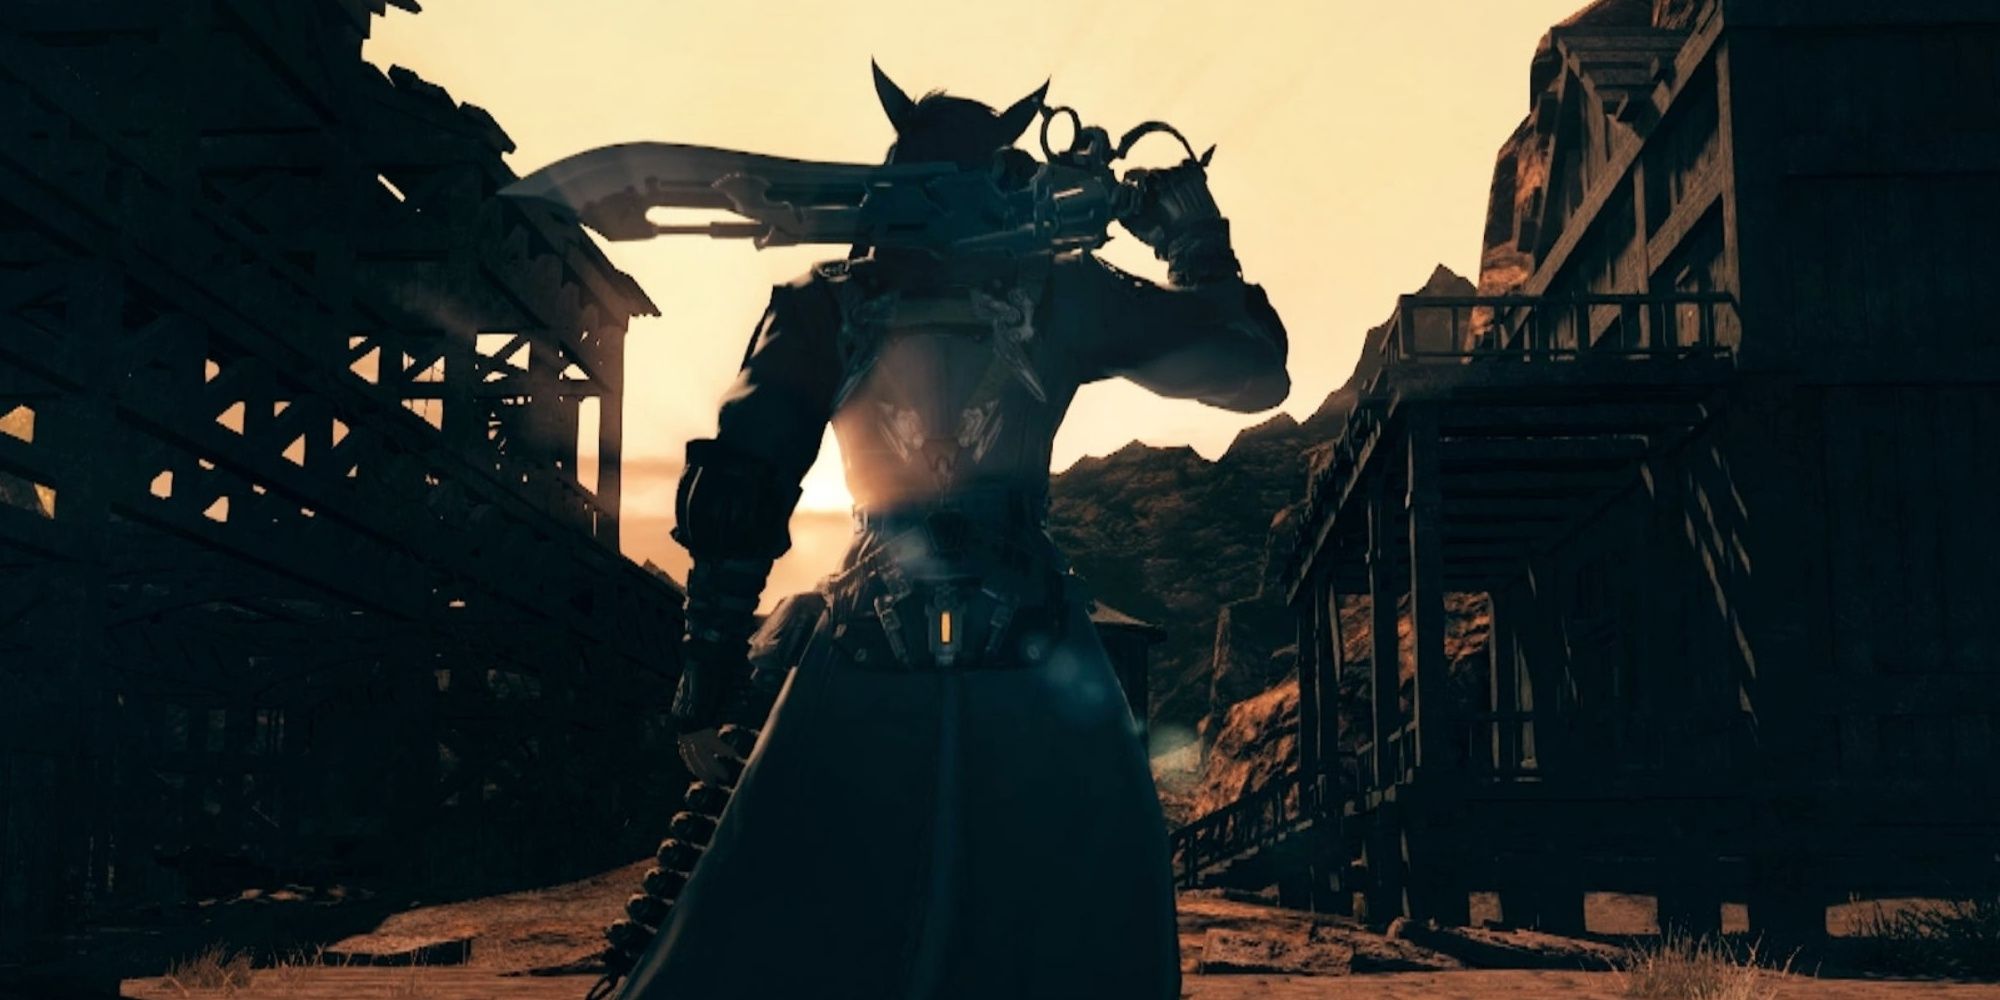 Final Fantasy 14 mod A male Miqo'te gunbreaker stands in a dusty town, while staring off into the sunset.